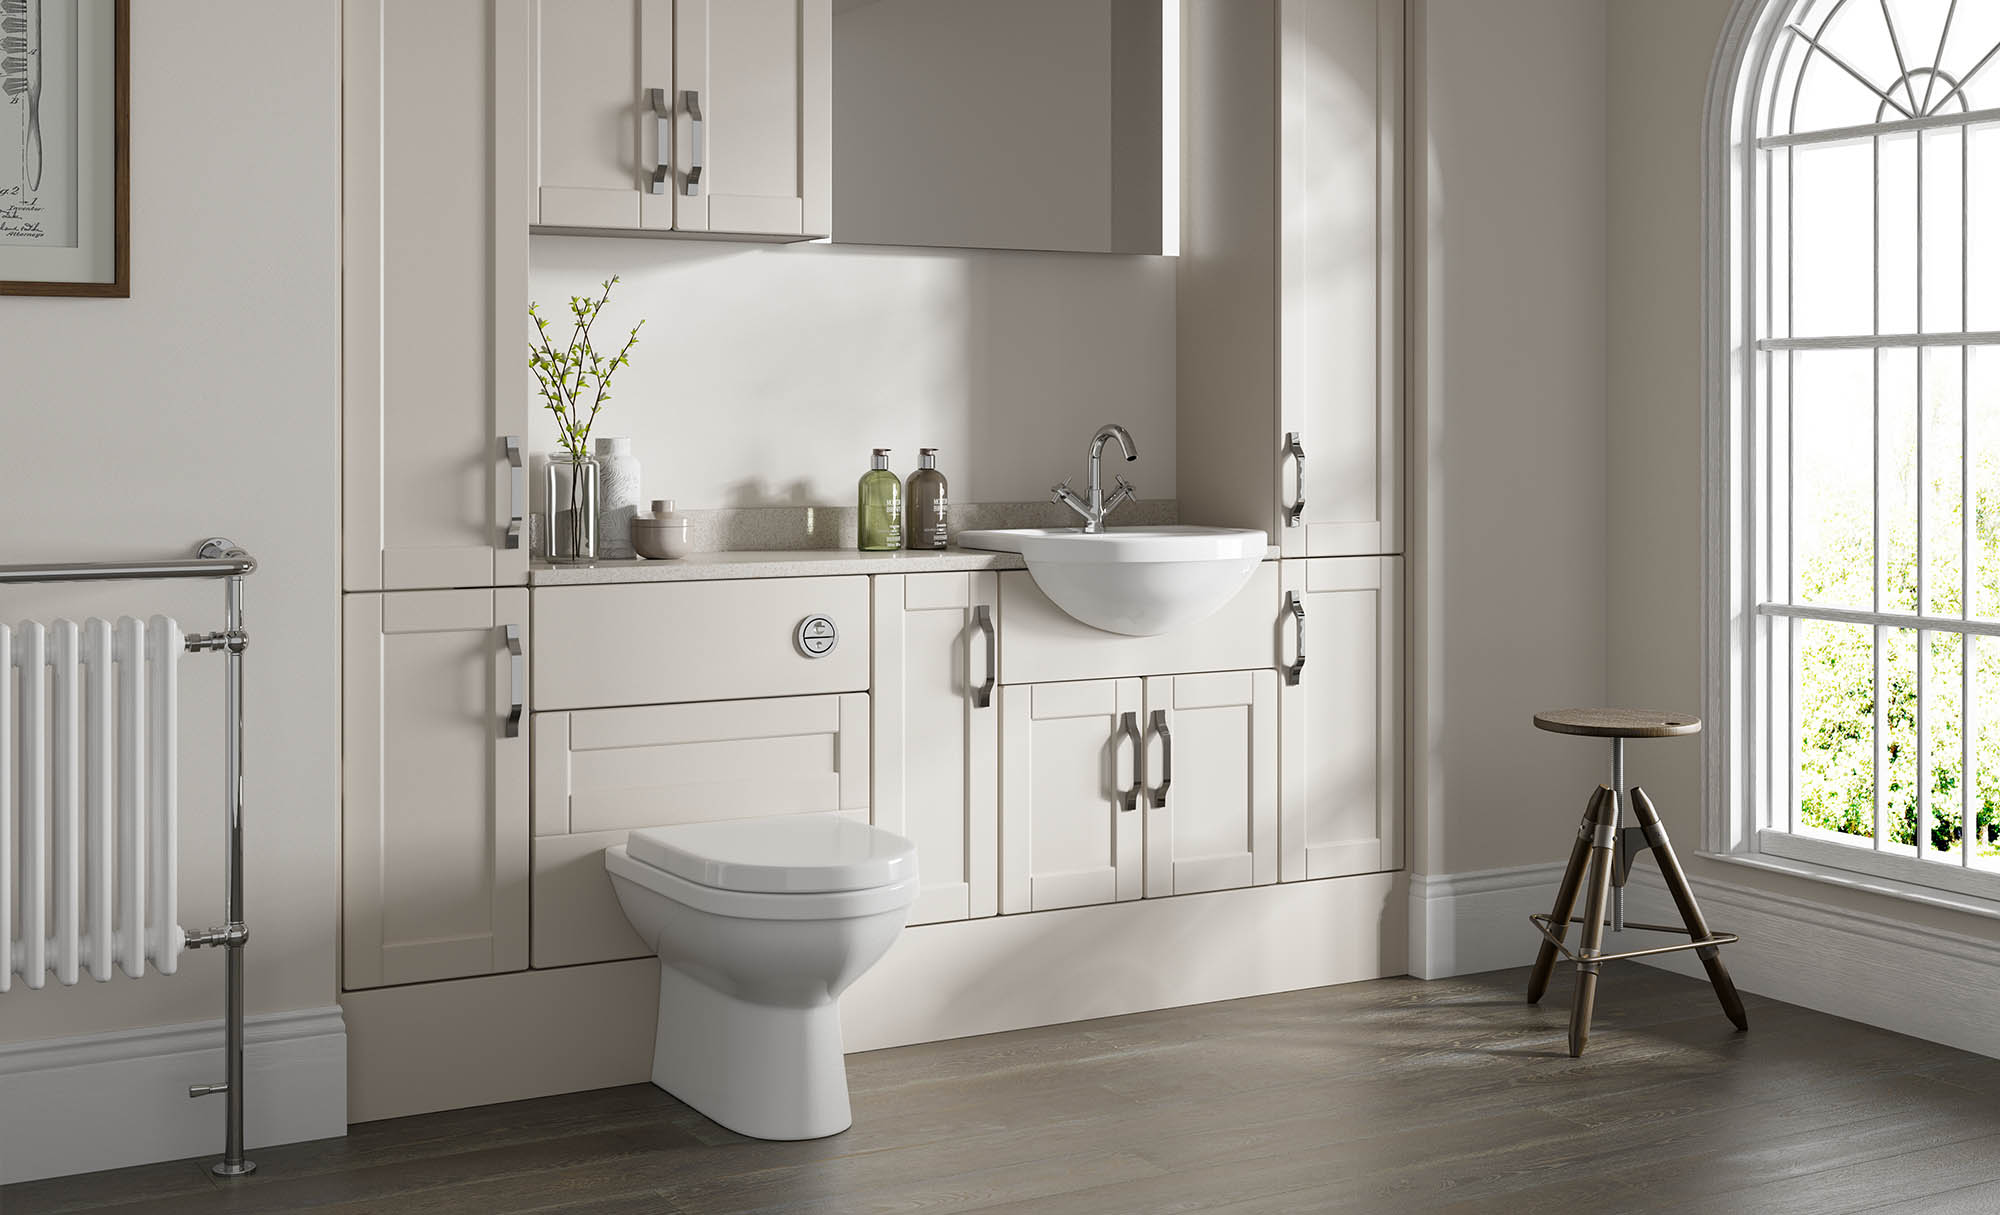 Gaddesby Bathrooms Cologne Mussel